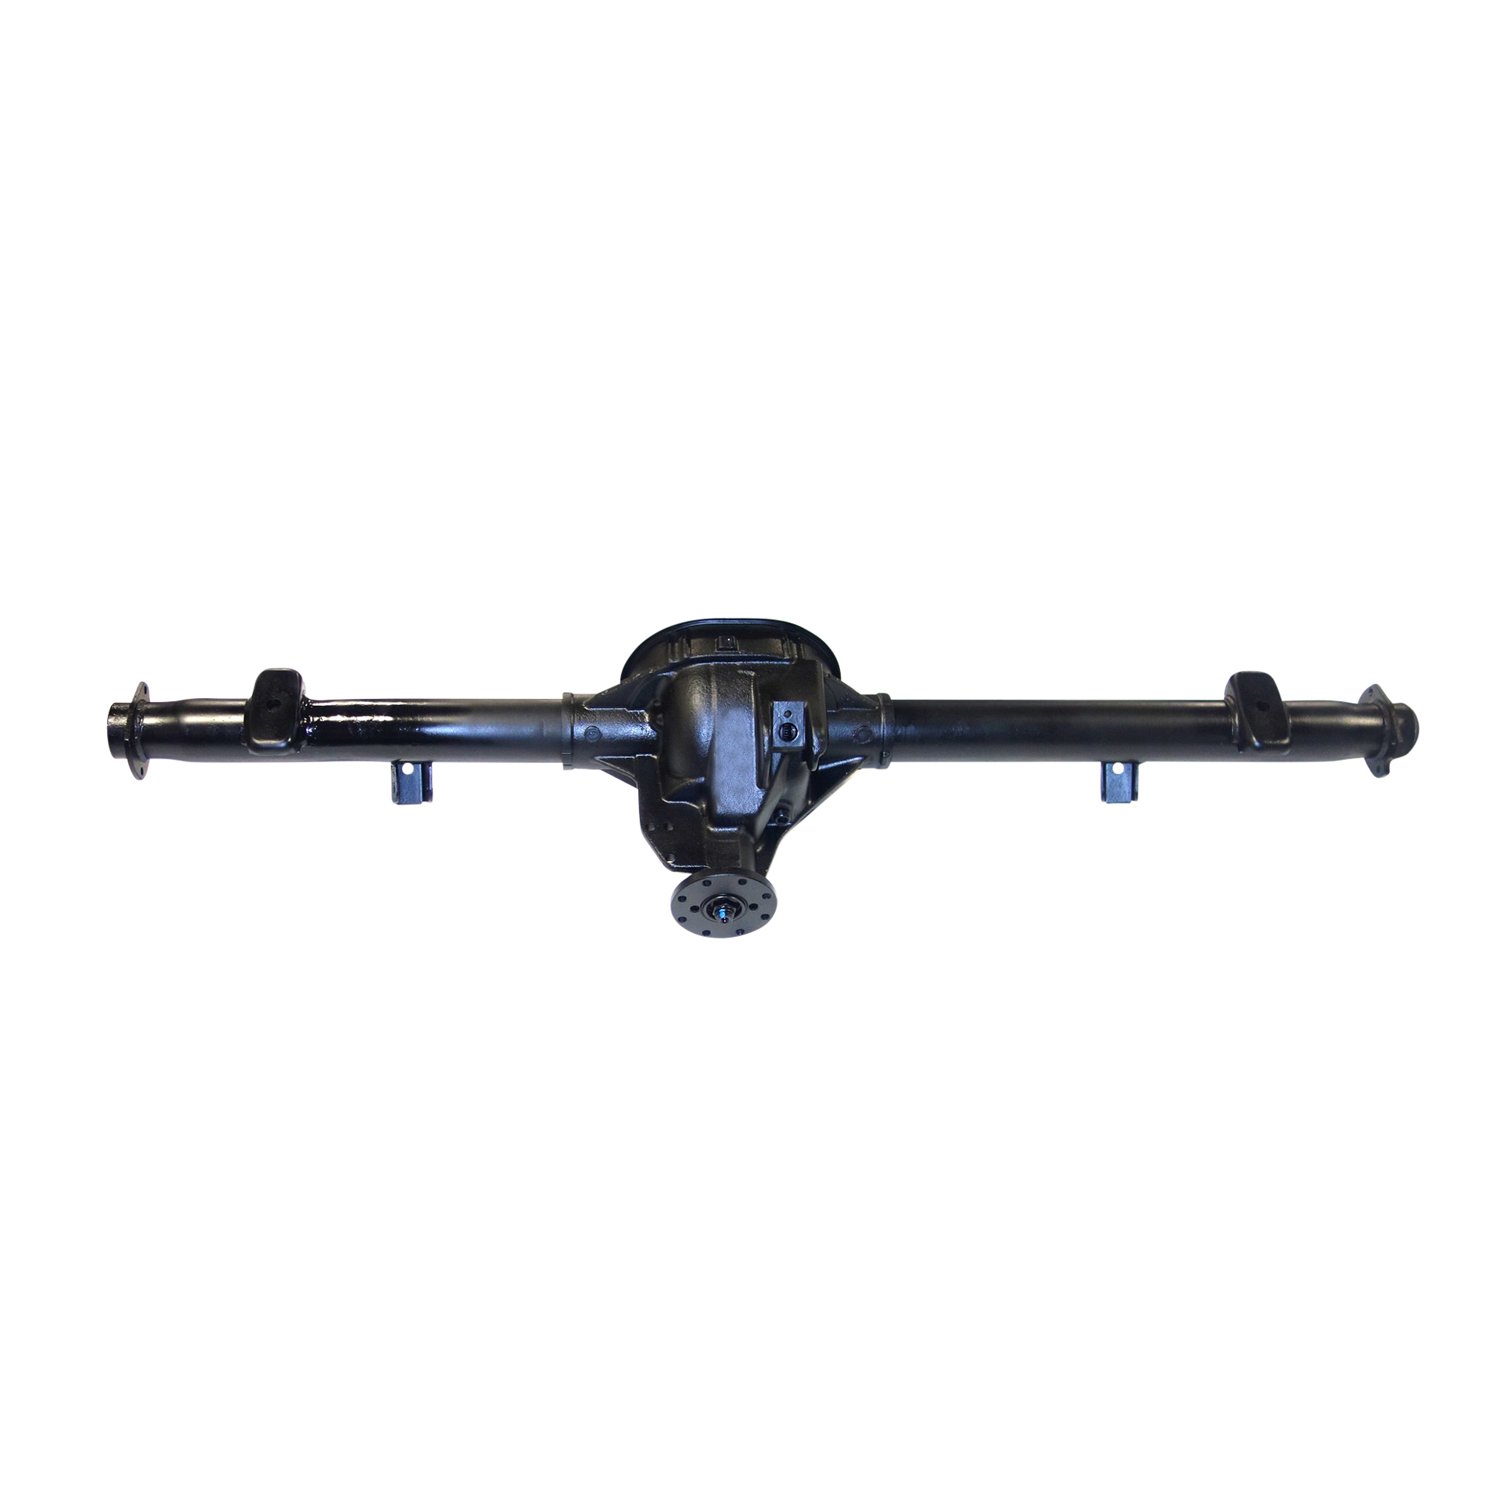 Remanufactured Axle Assy for 8.8" 2000 F150 4.11 , Rear Drum, Posi LSD *Check Tag*